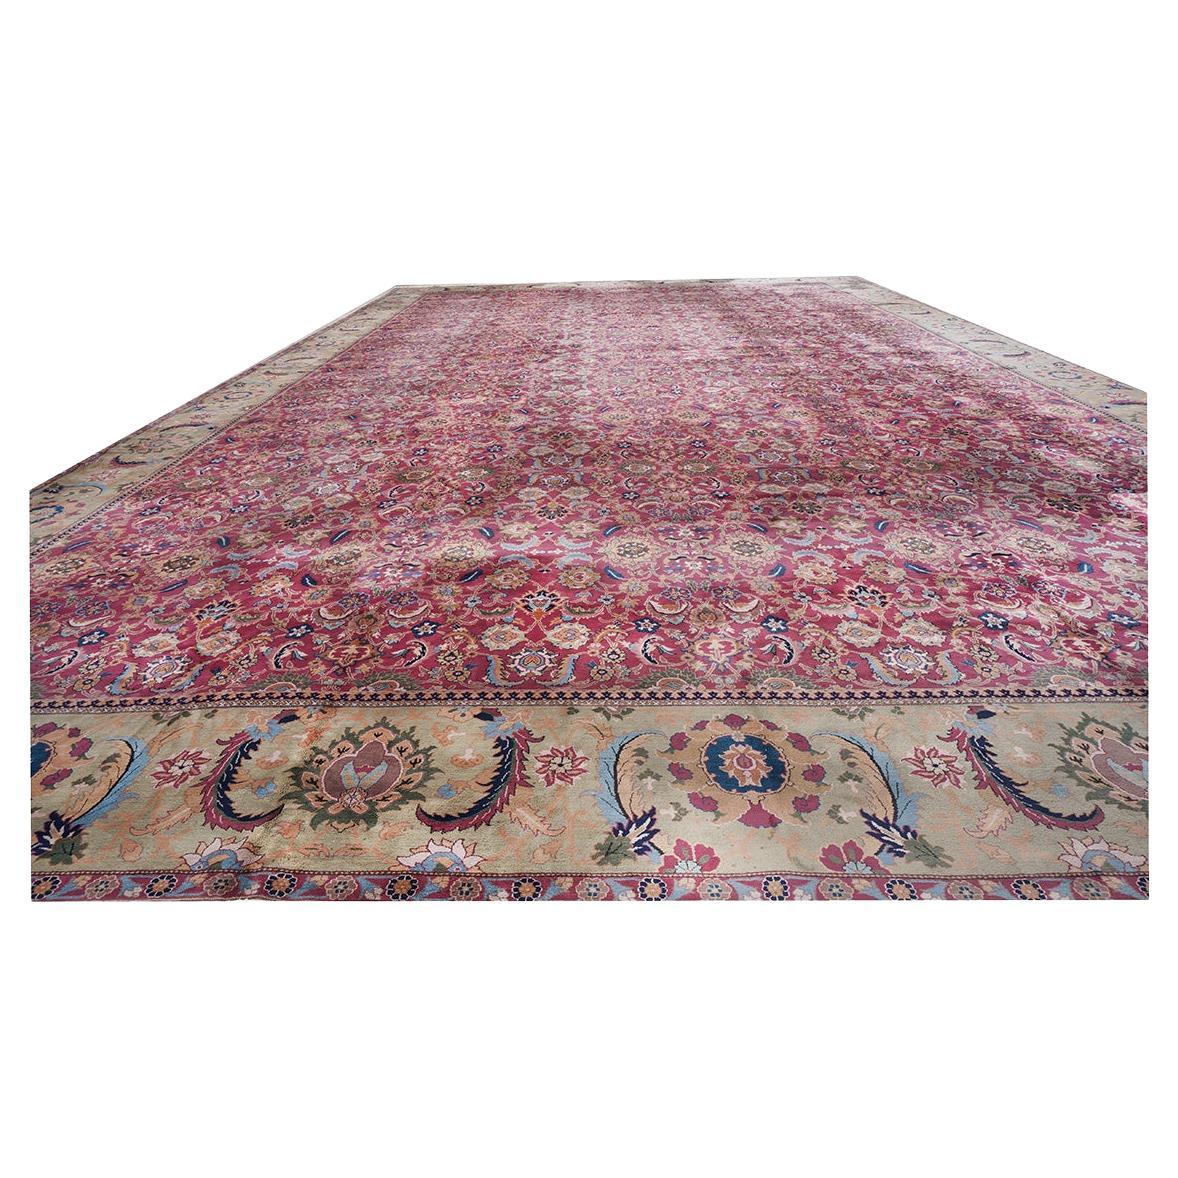 Early 20th Century 26'X42' Palace Sized Antique Laristan Wool Handmade Rug For Sale